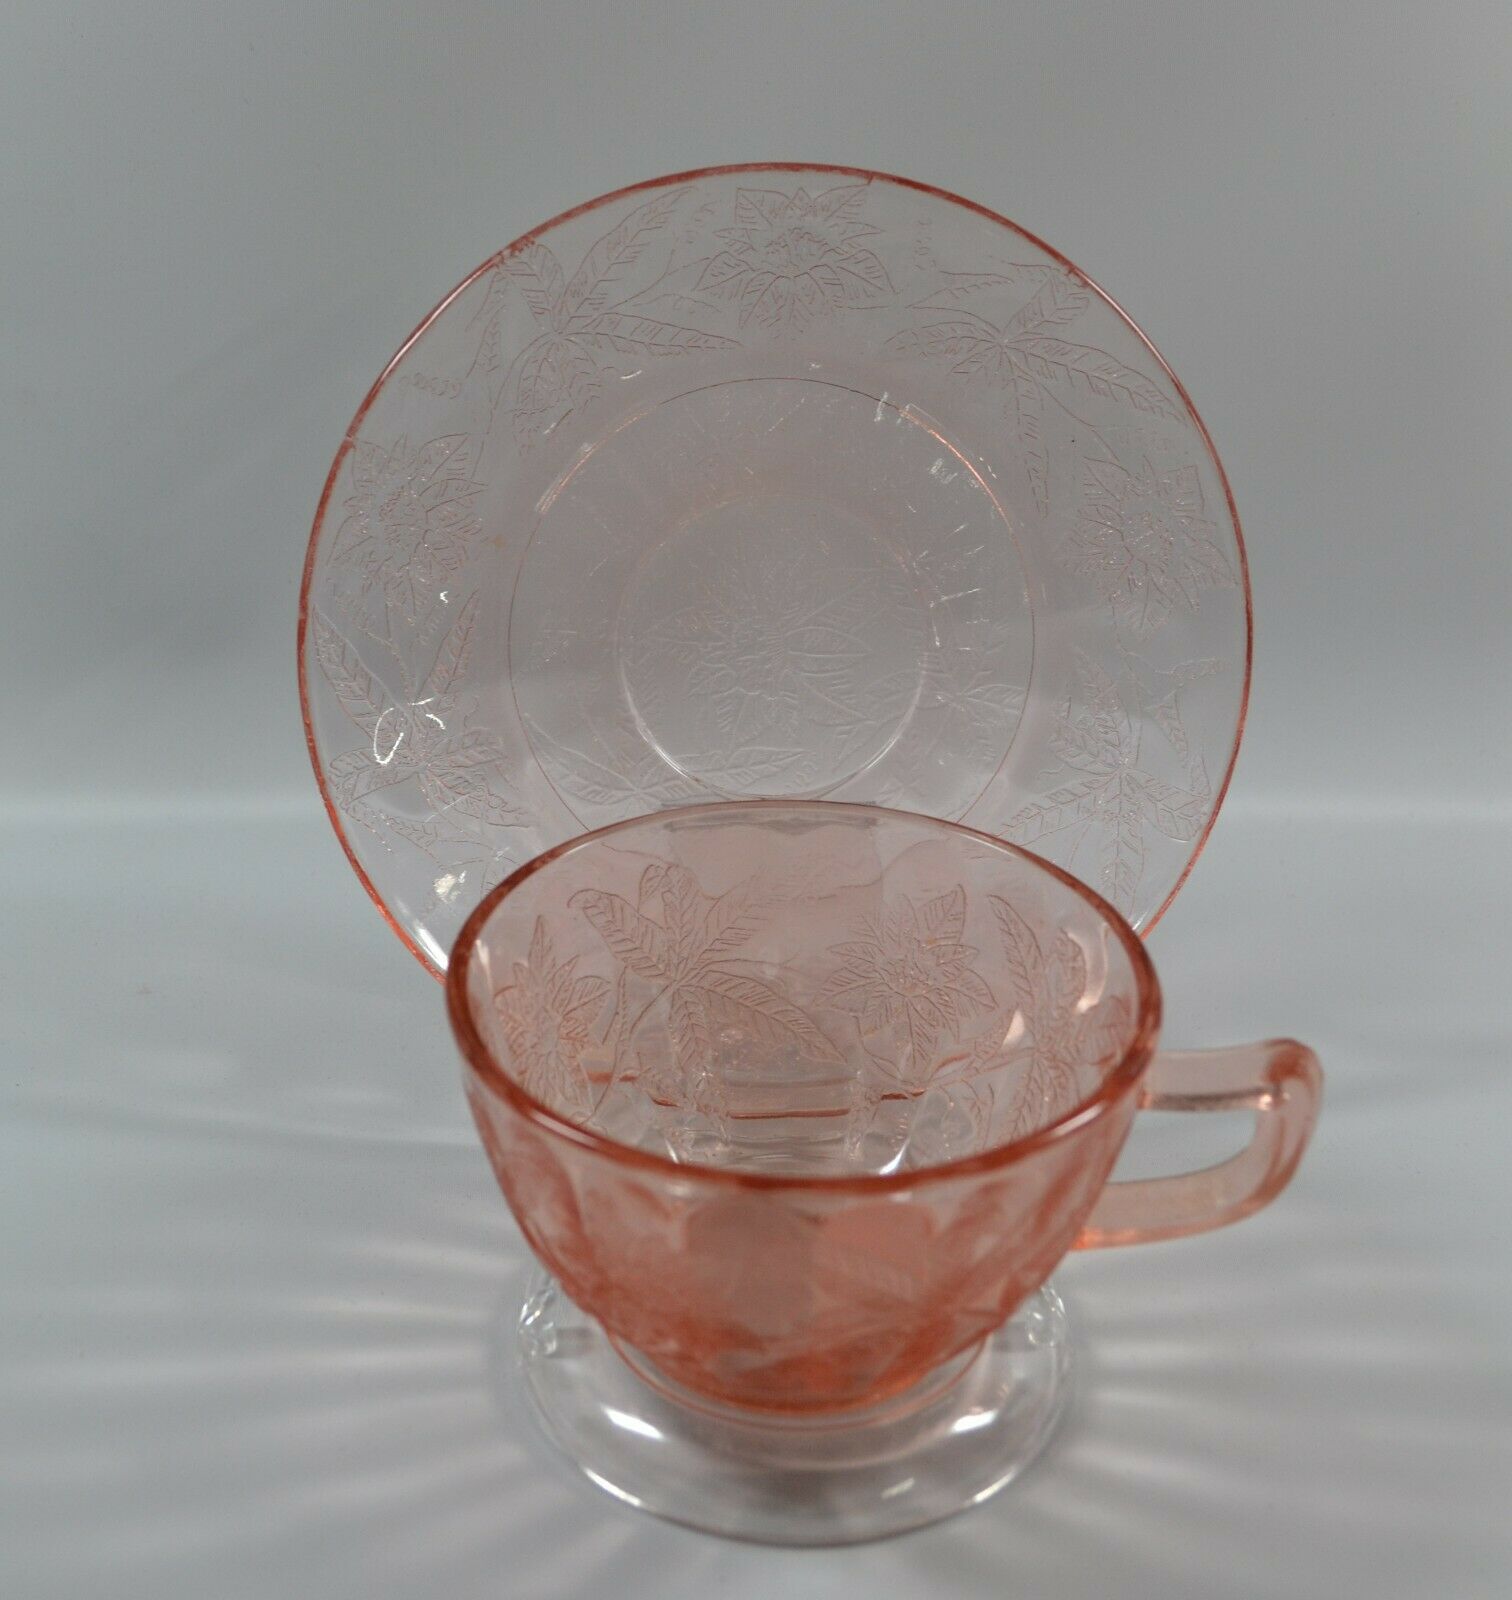 Three Pink Floral Poinsettia Cup and Saucers, One Price all 6 pcs,  c. 1931-1935